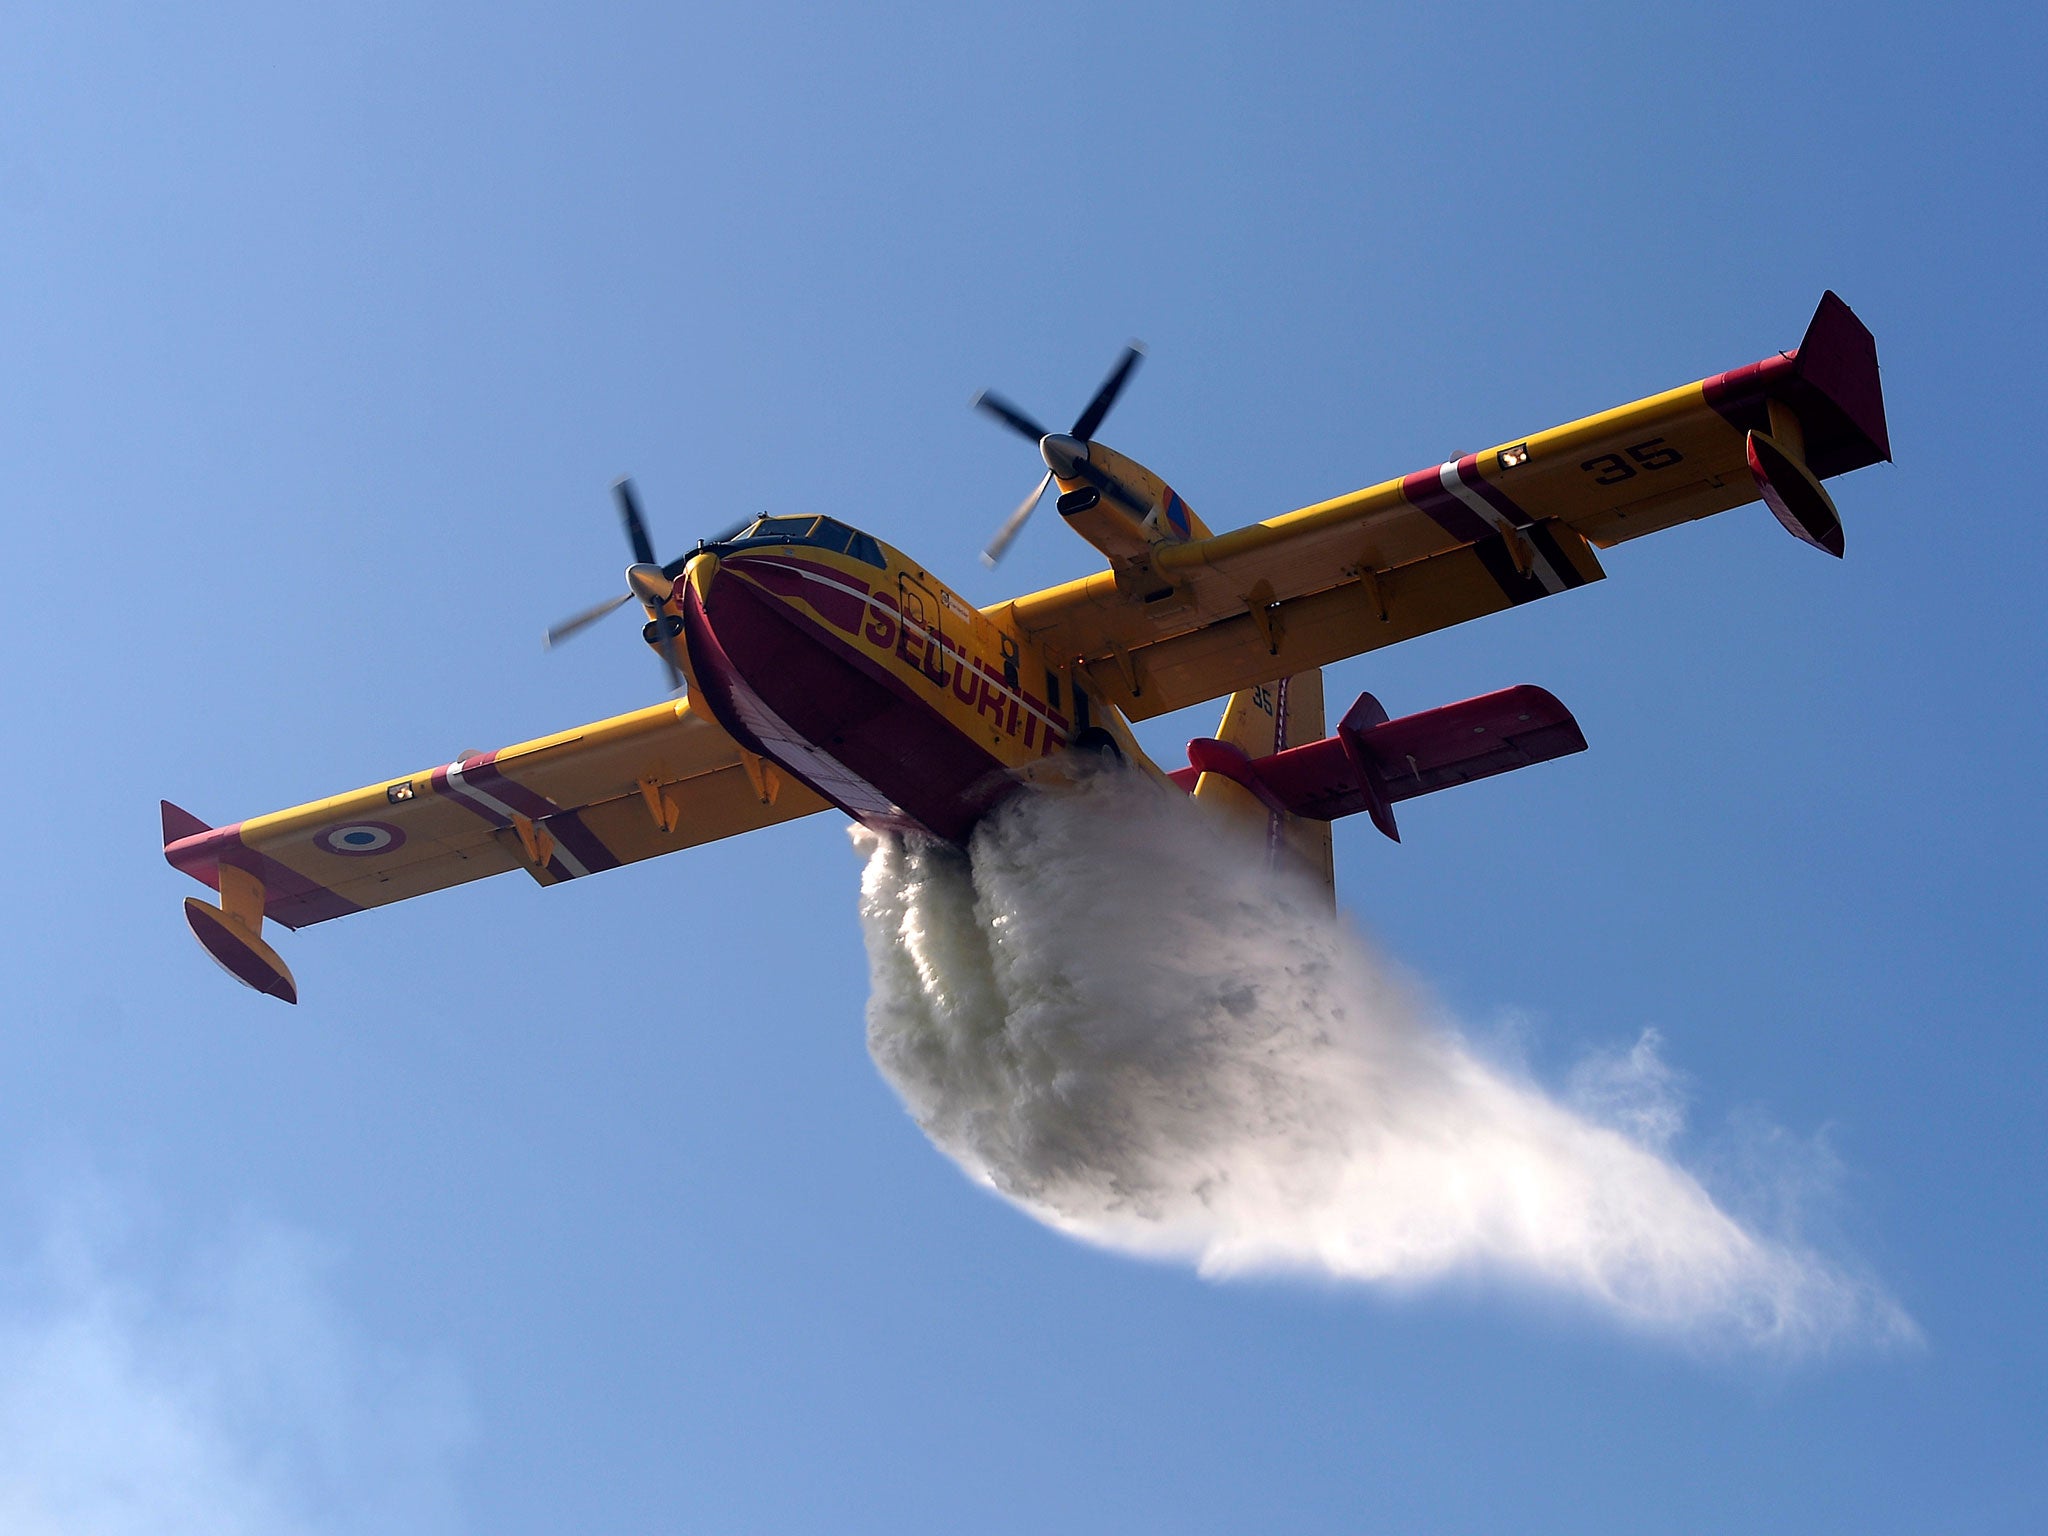 A Canadair amphibious aircraft drops its load over a wildfire in central Portugal in 2013